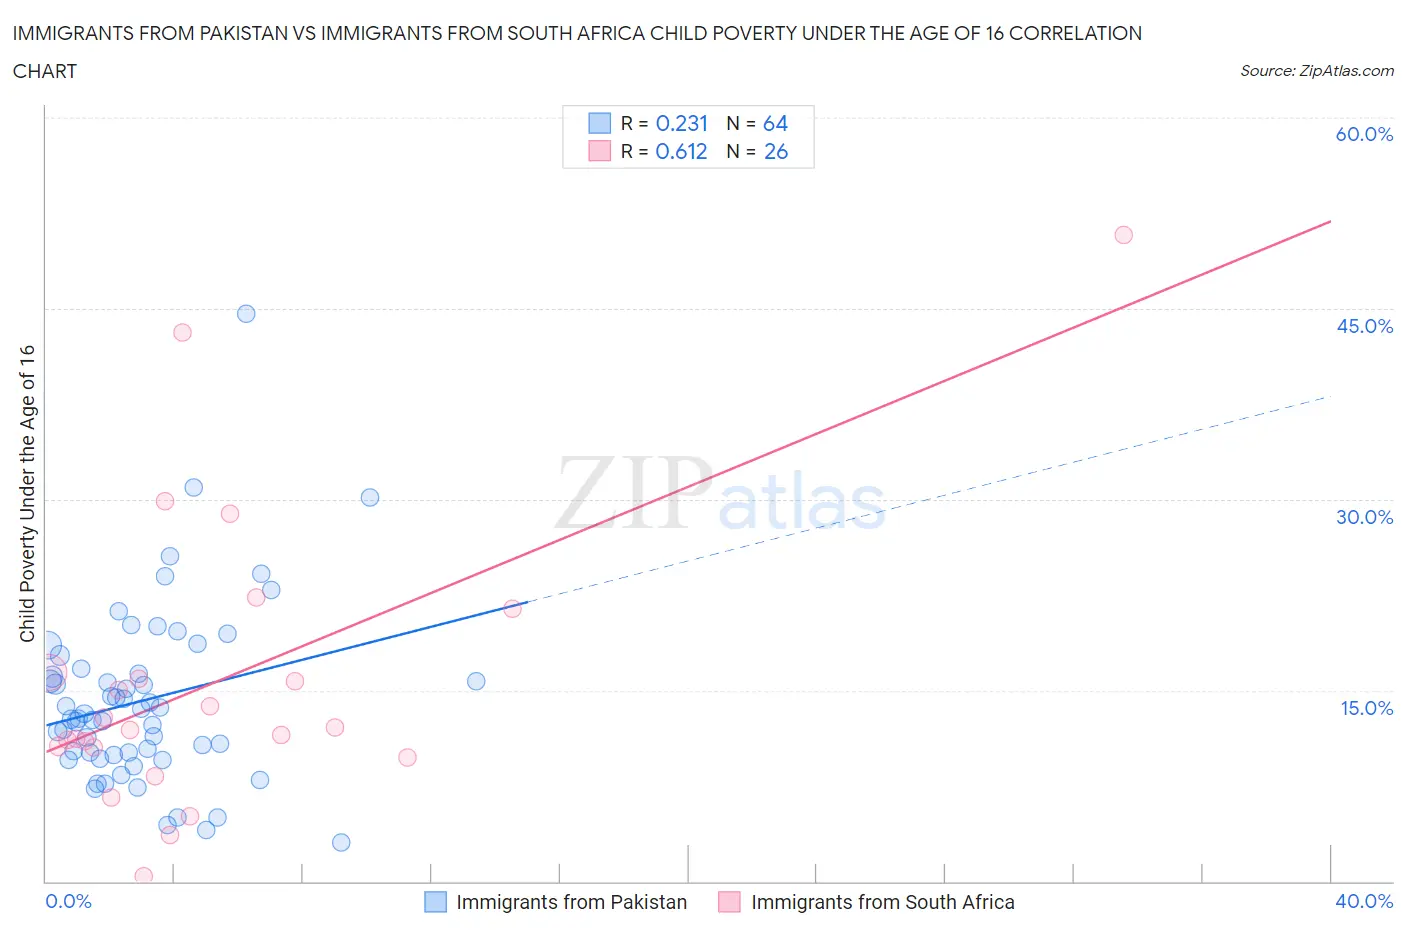 Immigrants from Pakistan vs Immigrants from South Africa Child Poverty Under the Age of 16